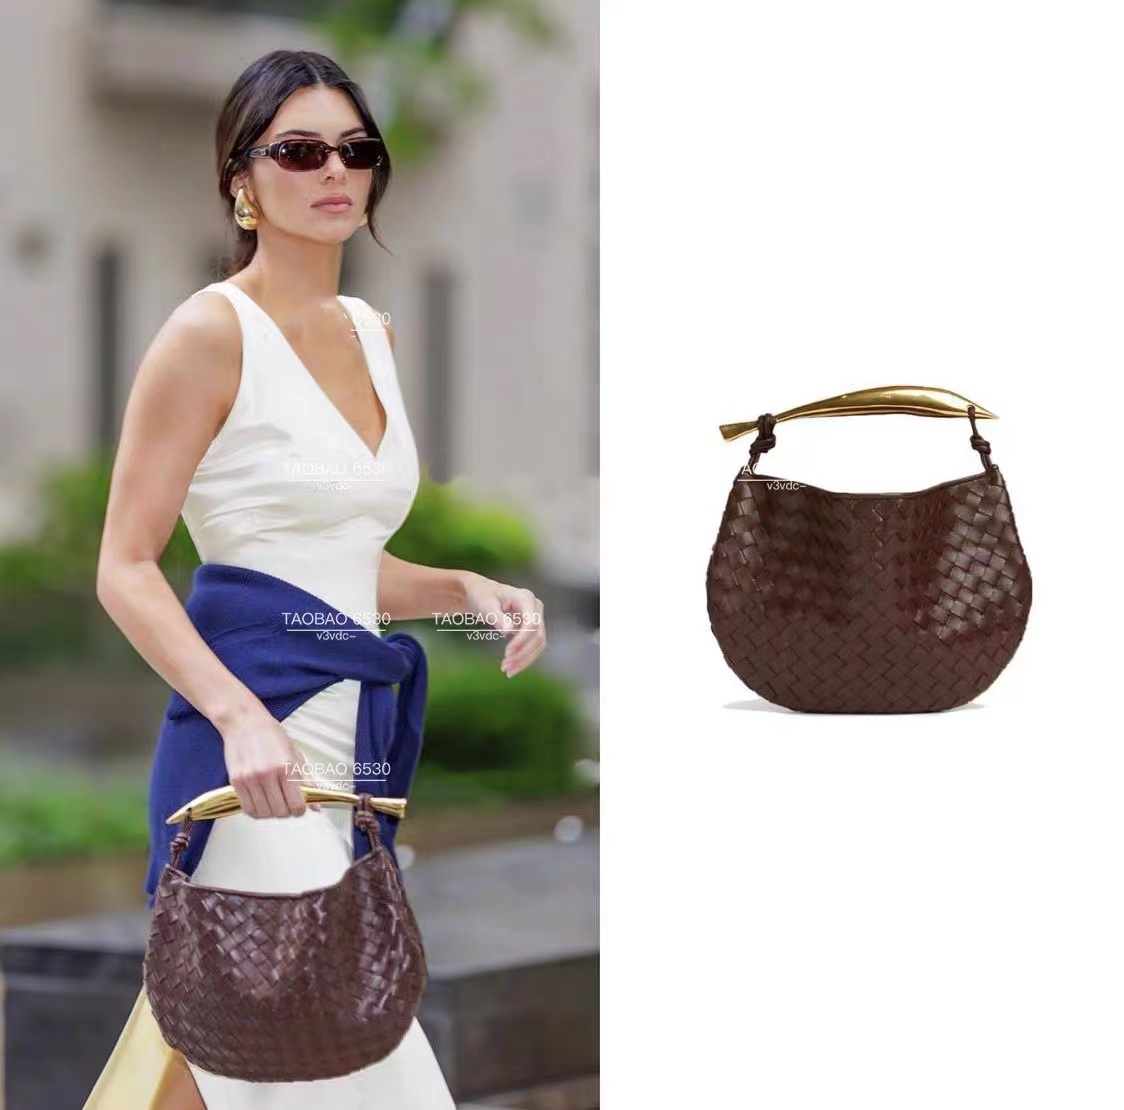 Real Cowhide Leather Top Handle Bag Women Handmade Woven Totes With Metal Handle Purses And Handbags Fashion Girl Clutches Bags 2413